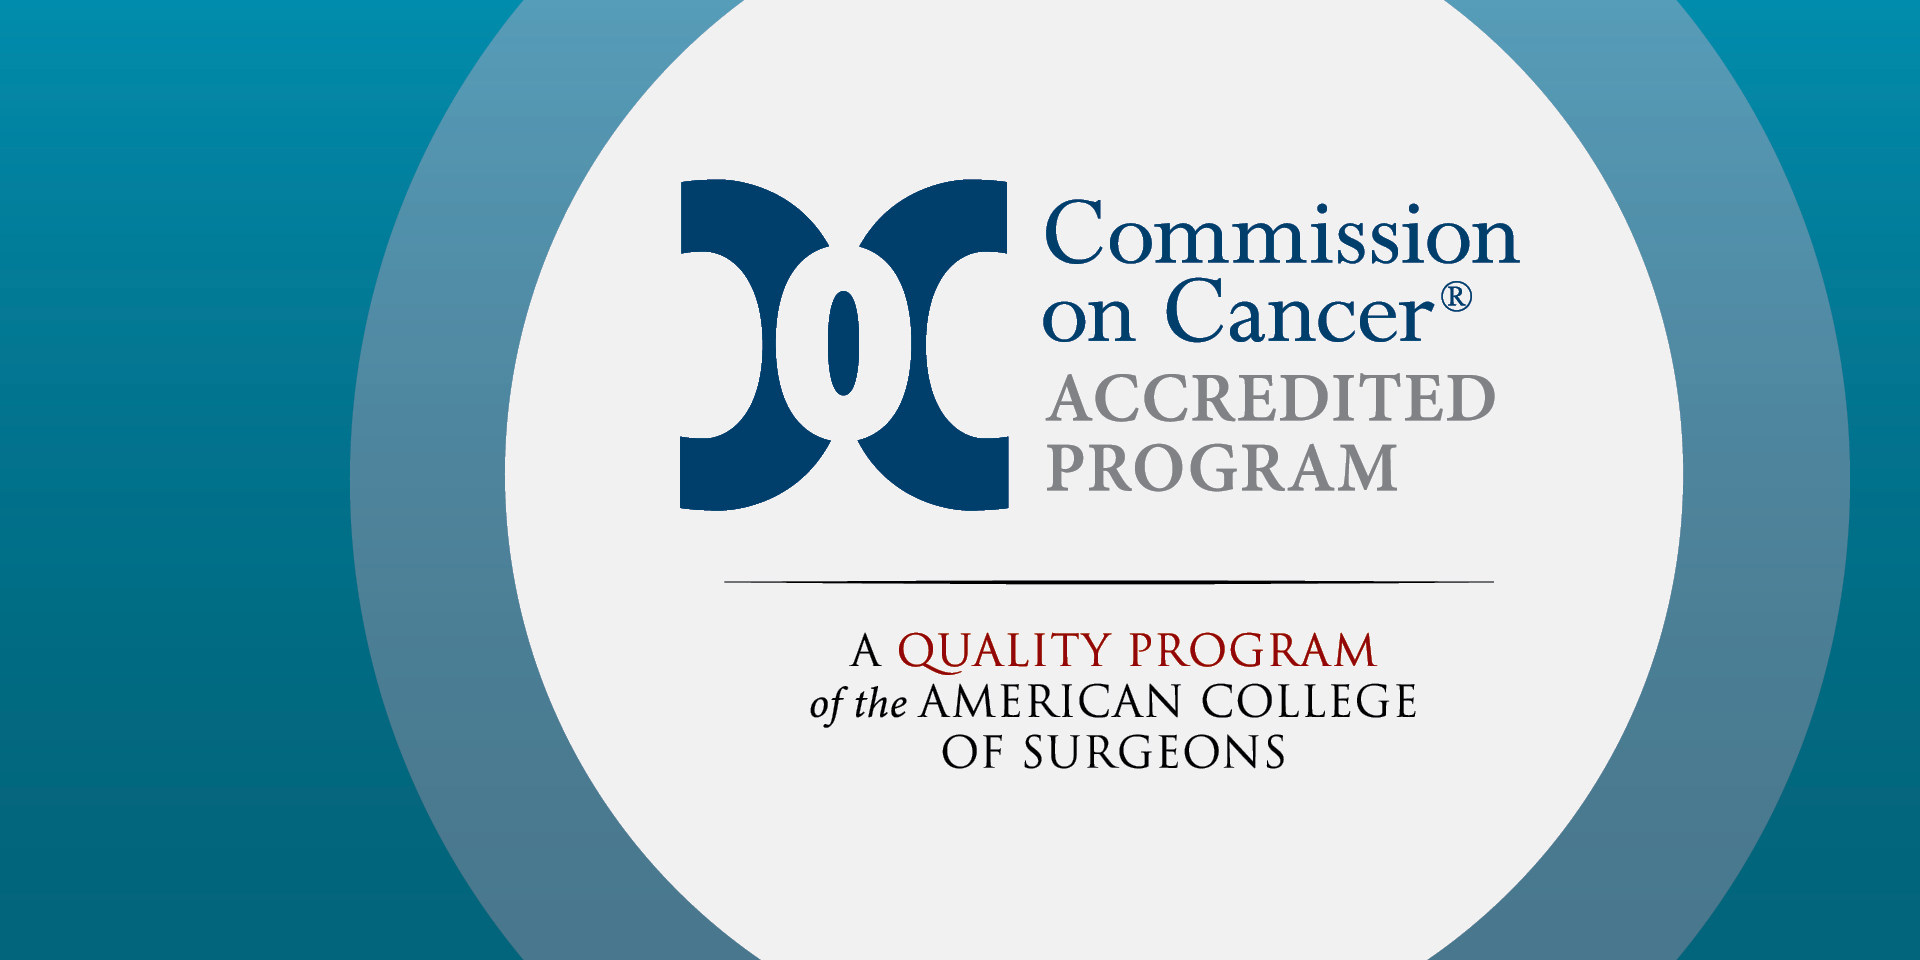 Doylestown Hospital’s Cancer Institute Earns National Accreditation from the Commission on Cancer of the American College of Surgeons | Doylestown Health